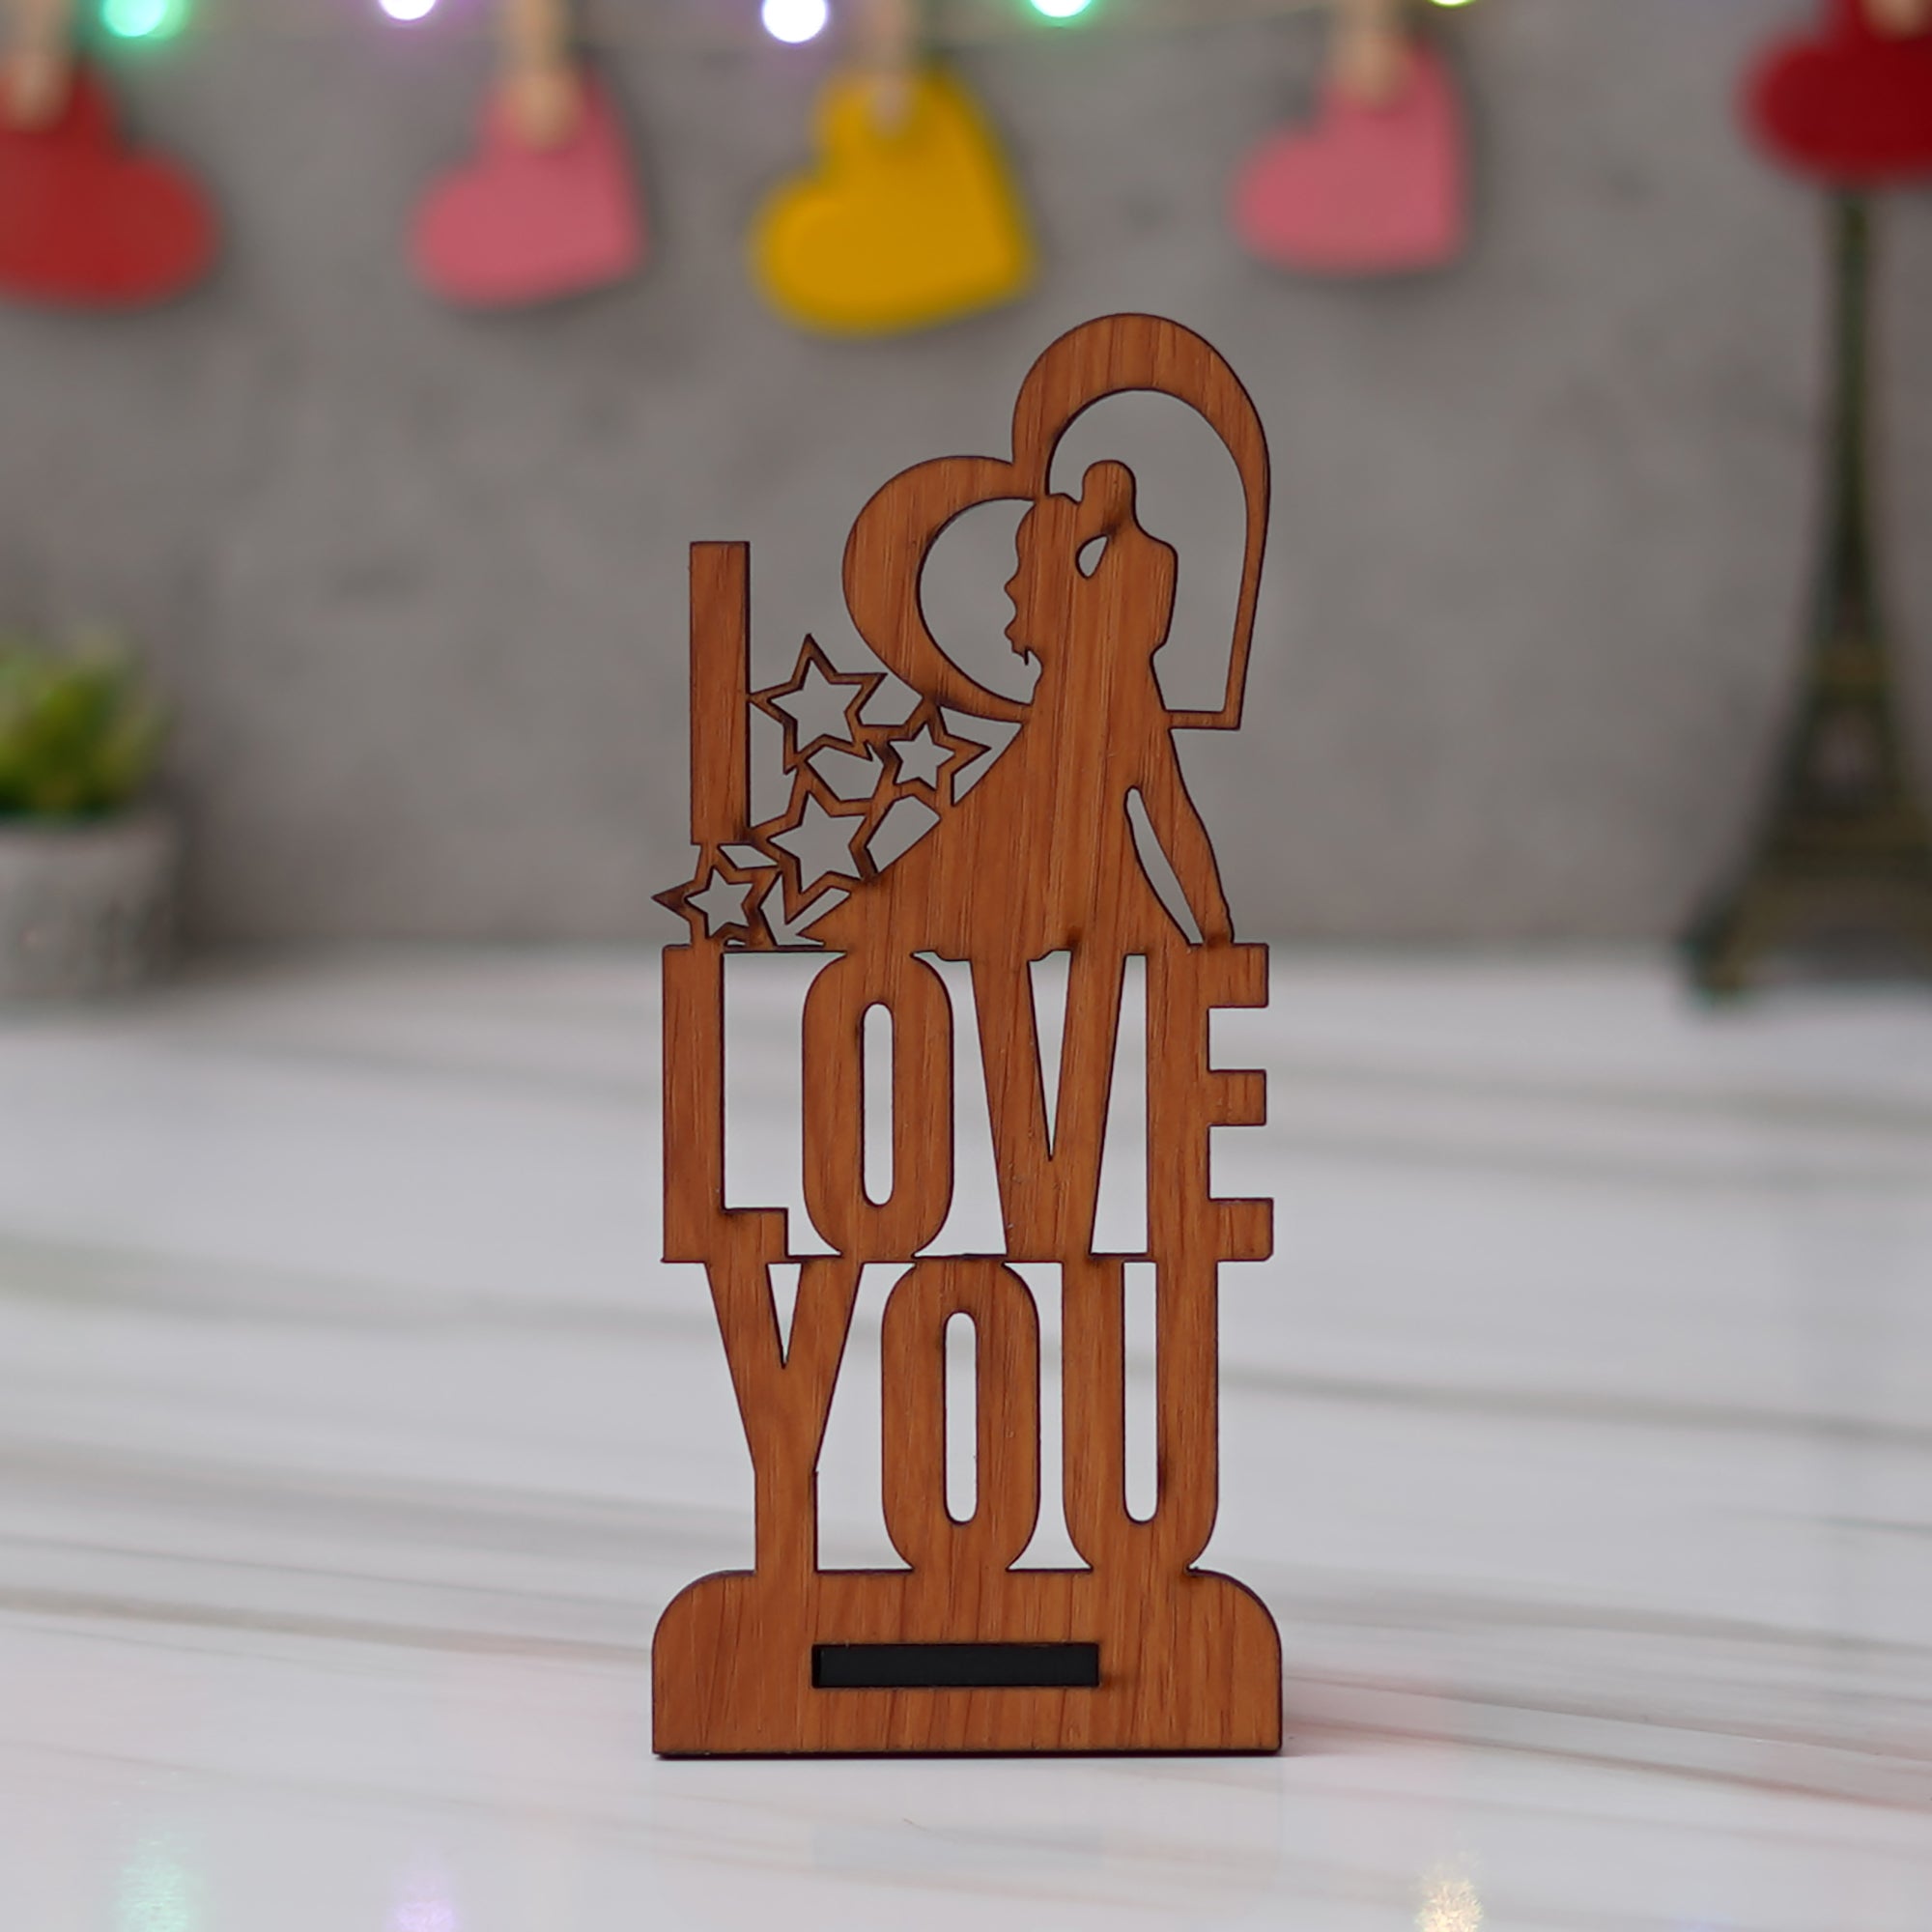 Valentine Combo of Golden Red Rose Gift Set, "Love You" Wooden Showpiece With Stand, Bride Kissing Groom Romantic Polyresin Decorative Showpiece 3